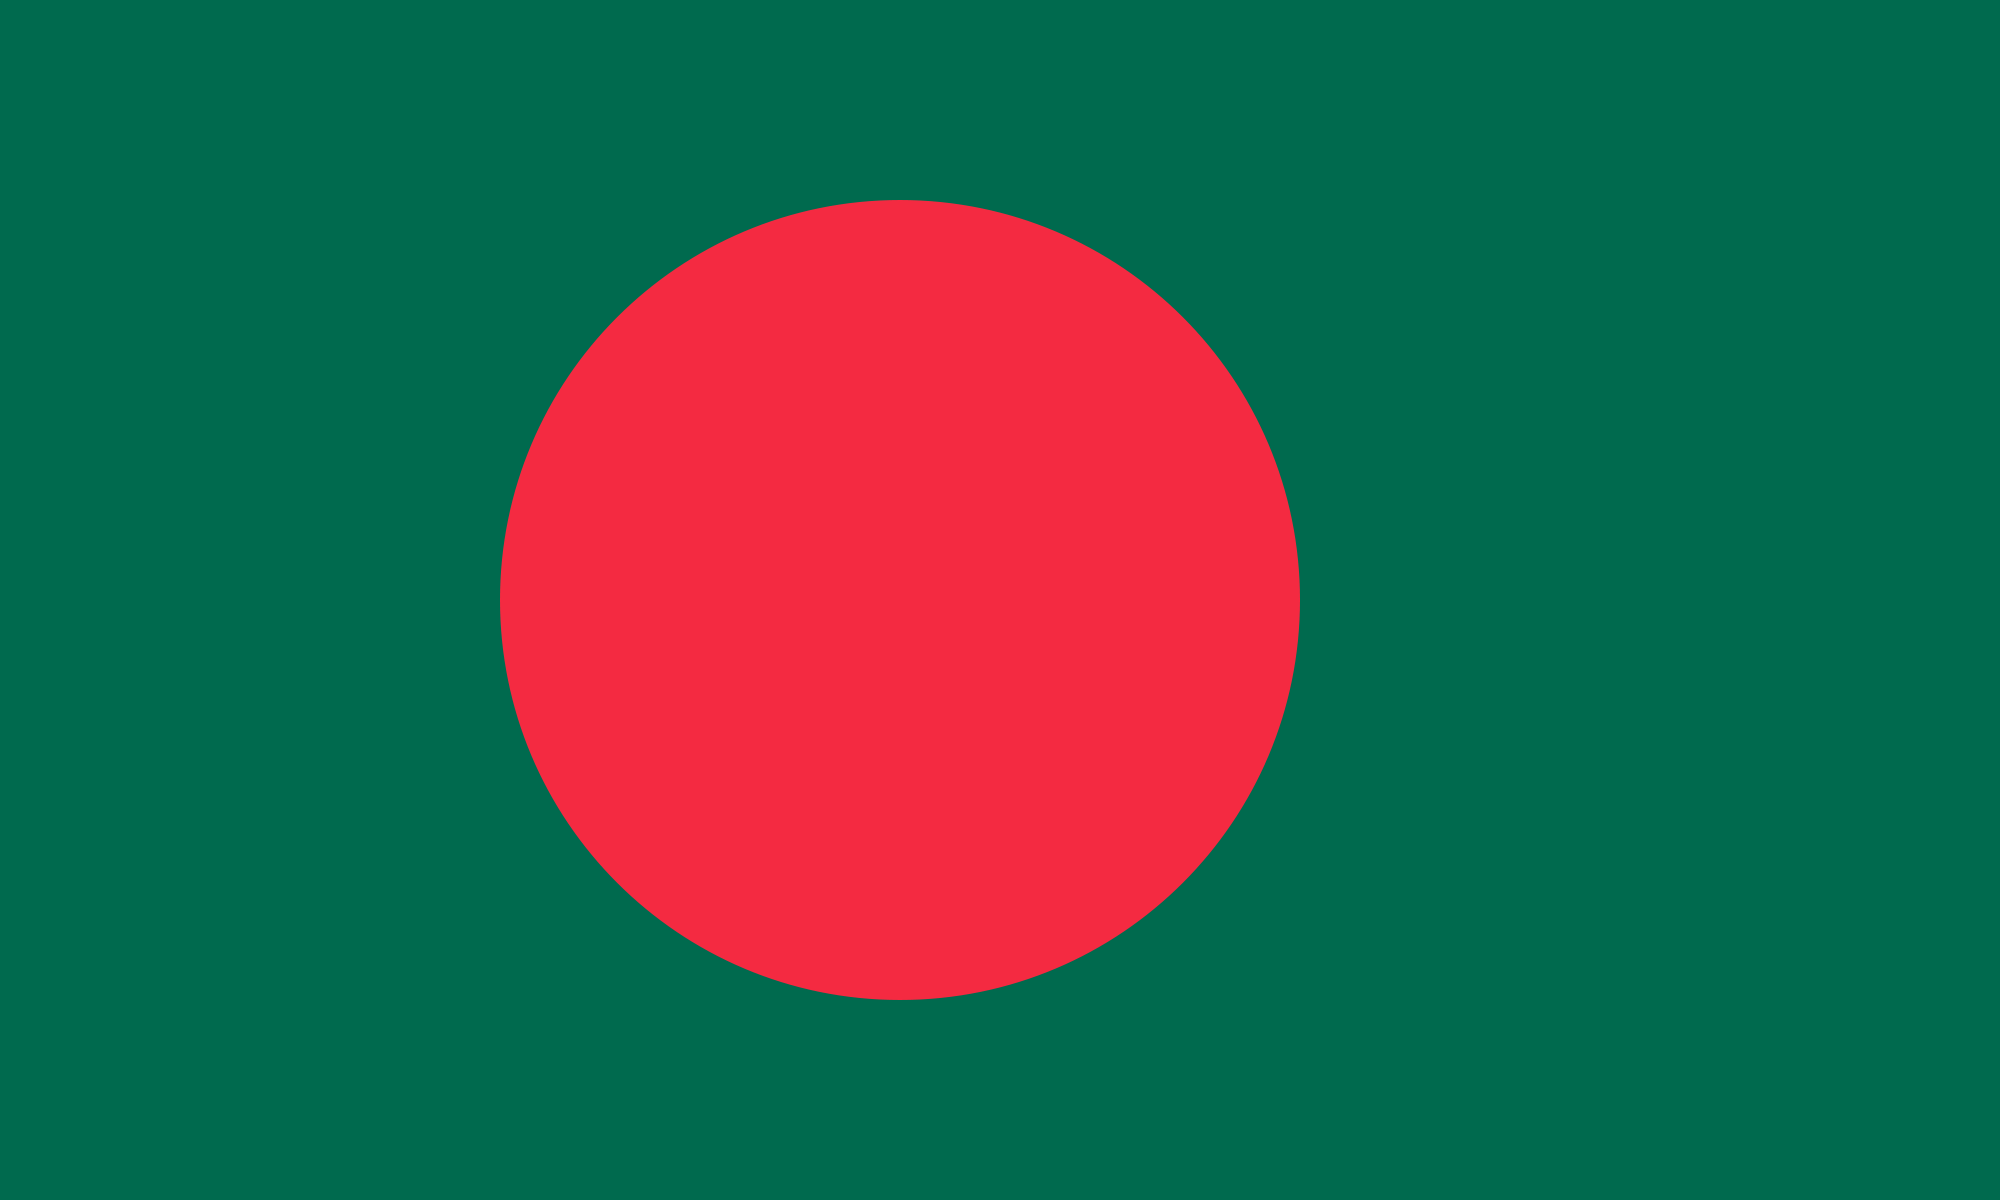 Bangladesh Flag Colors Meaning And Symbolism